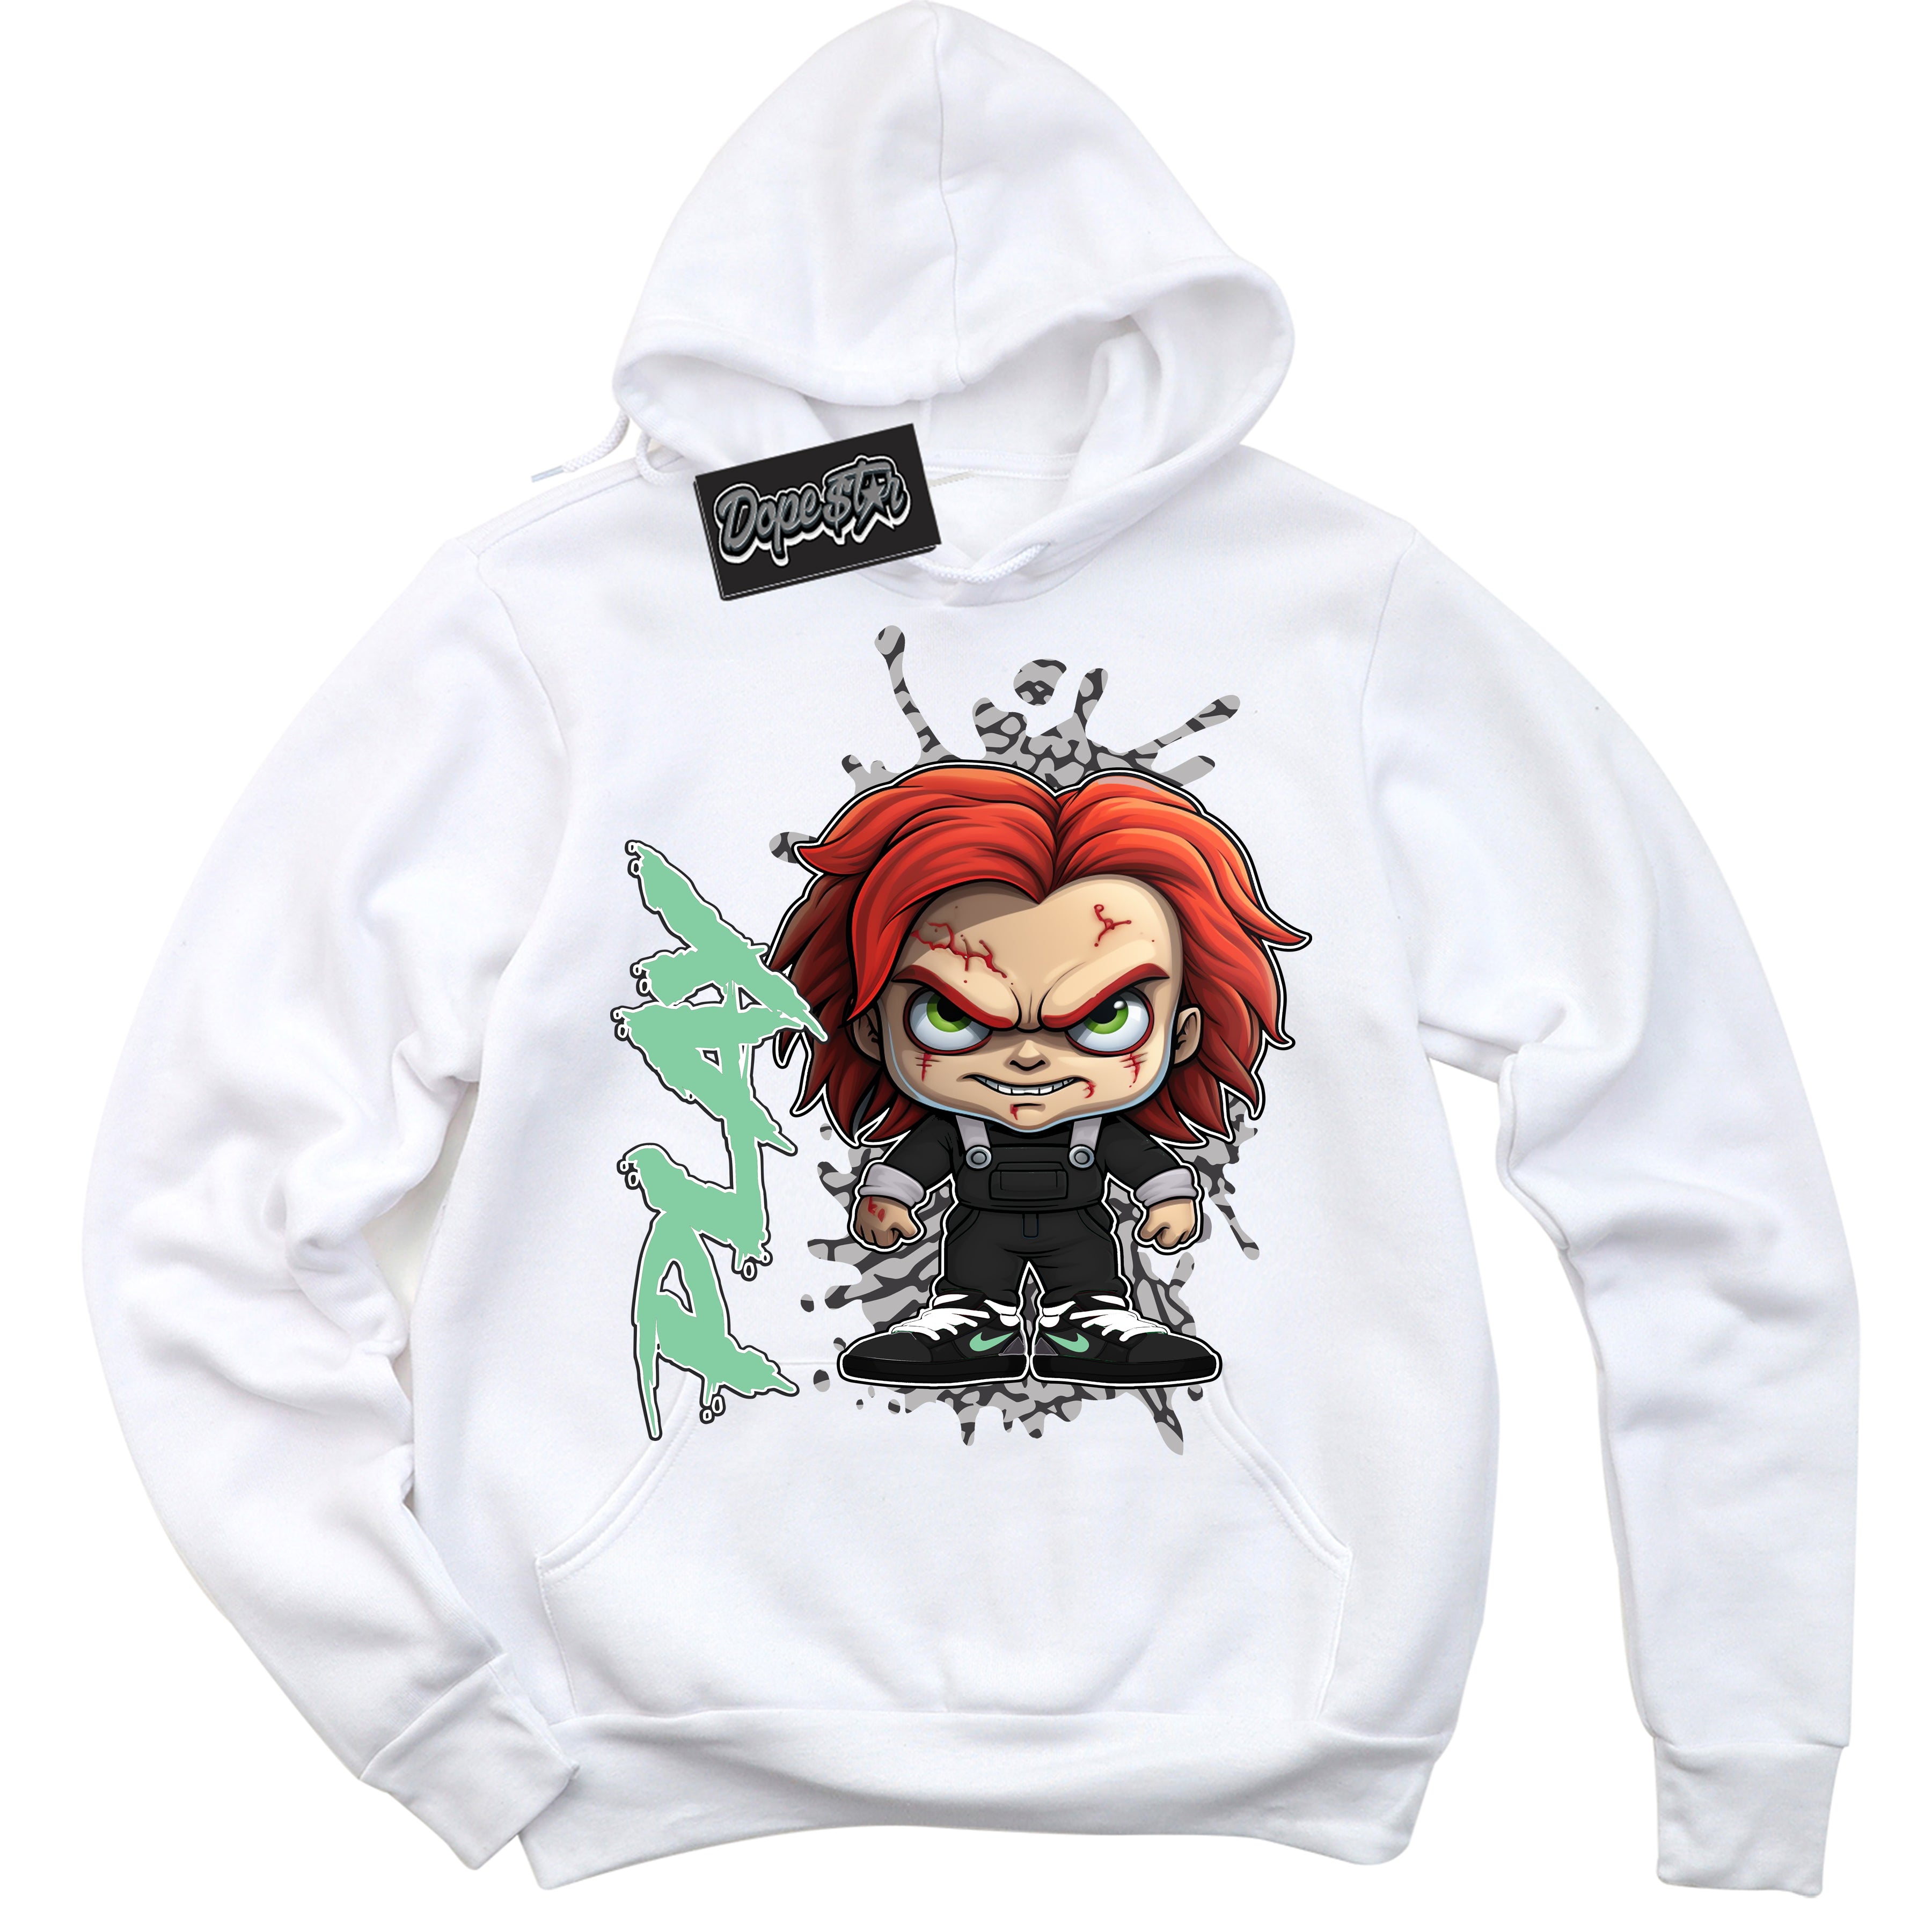 Cool White Graphic DopeStar Hoodie with “ Chucky Play “ print, that perfectly matches Green Glow 3s sneakers